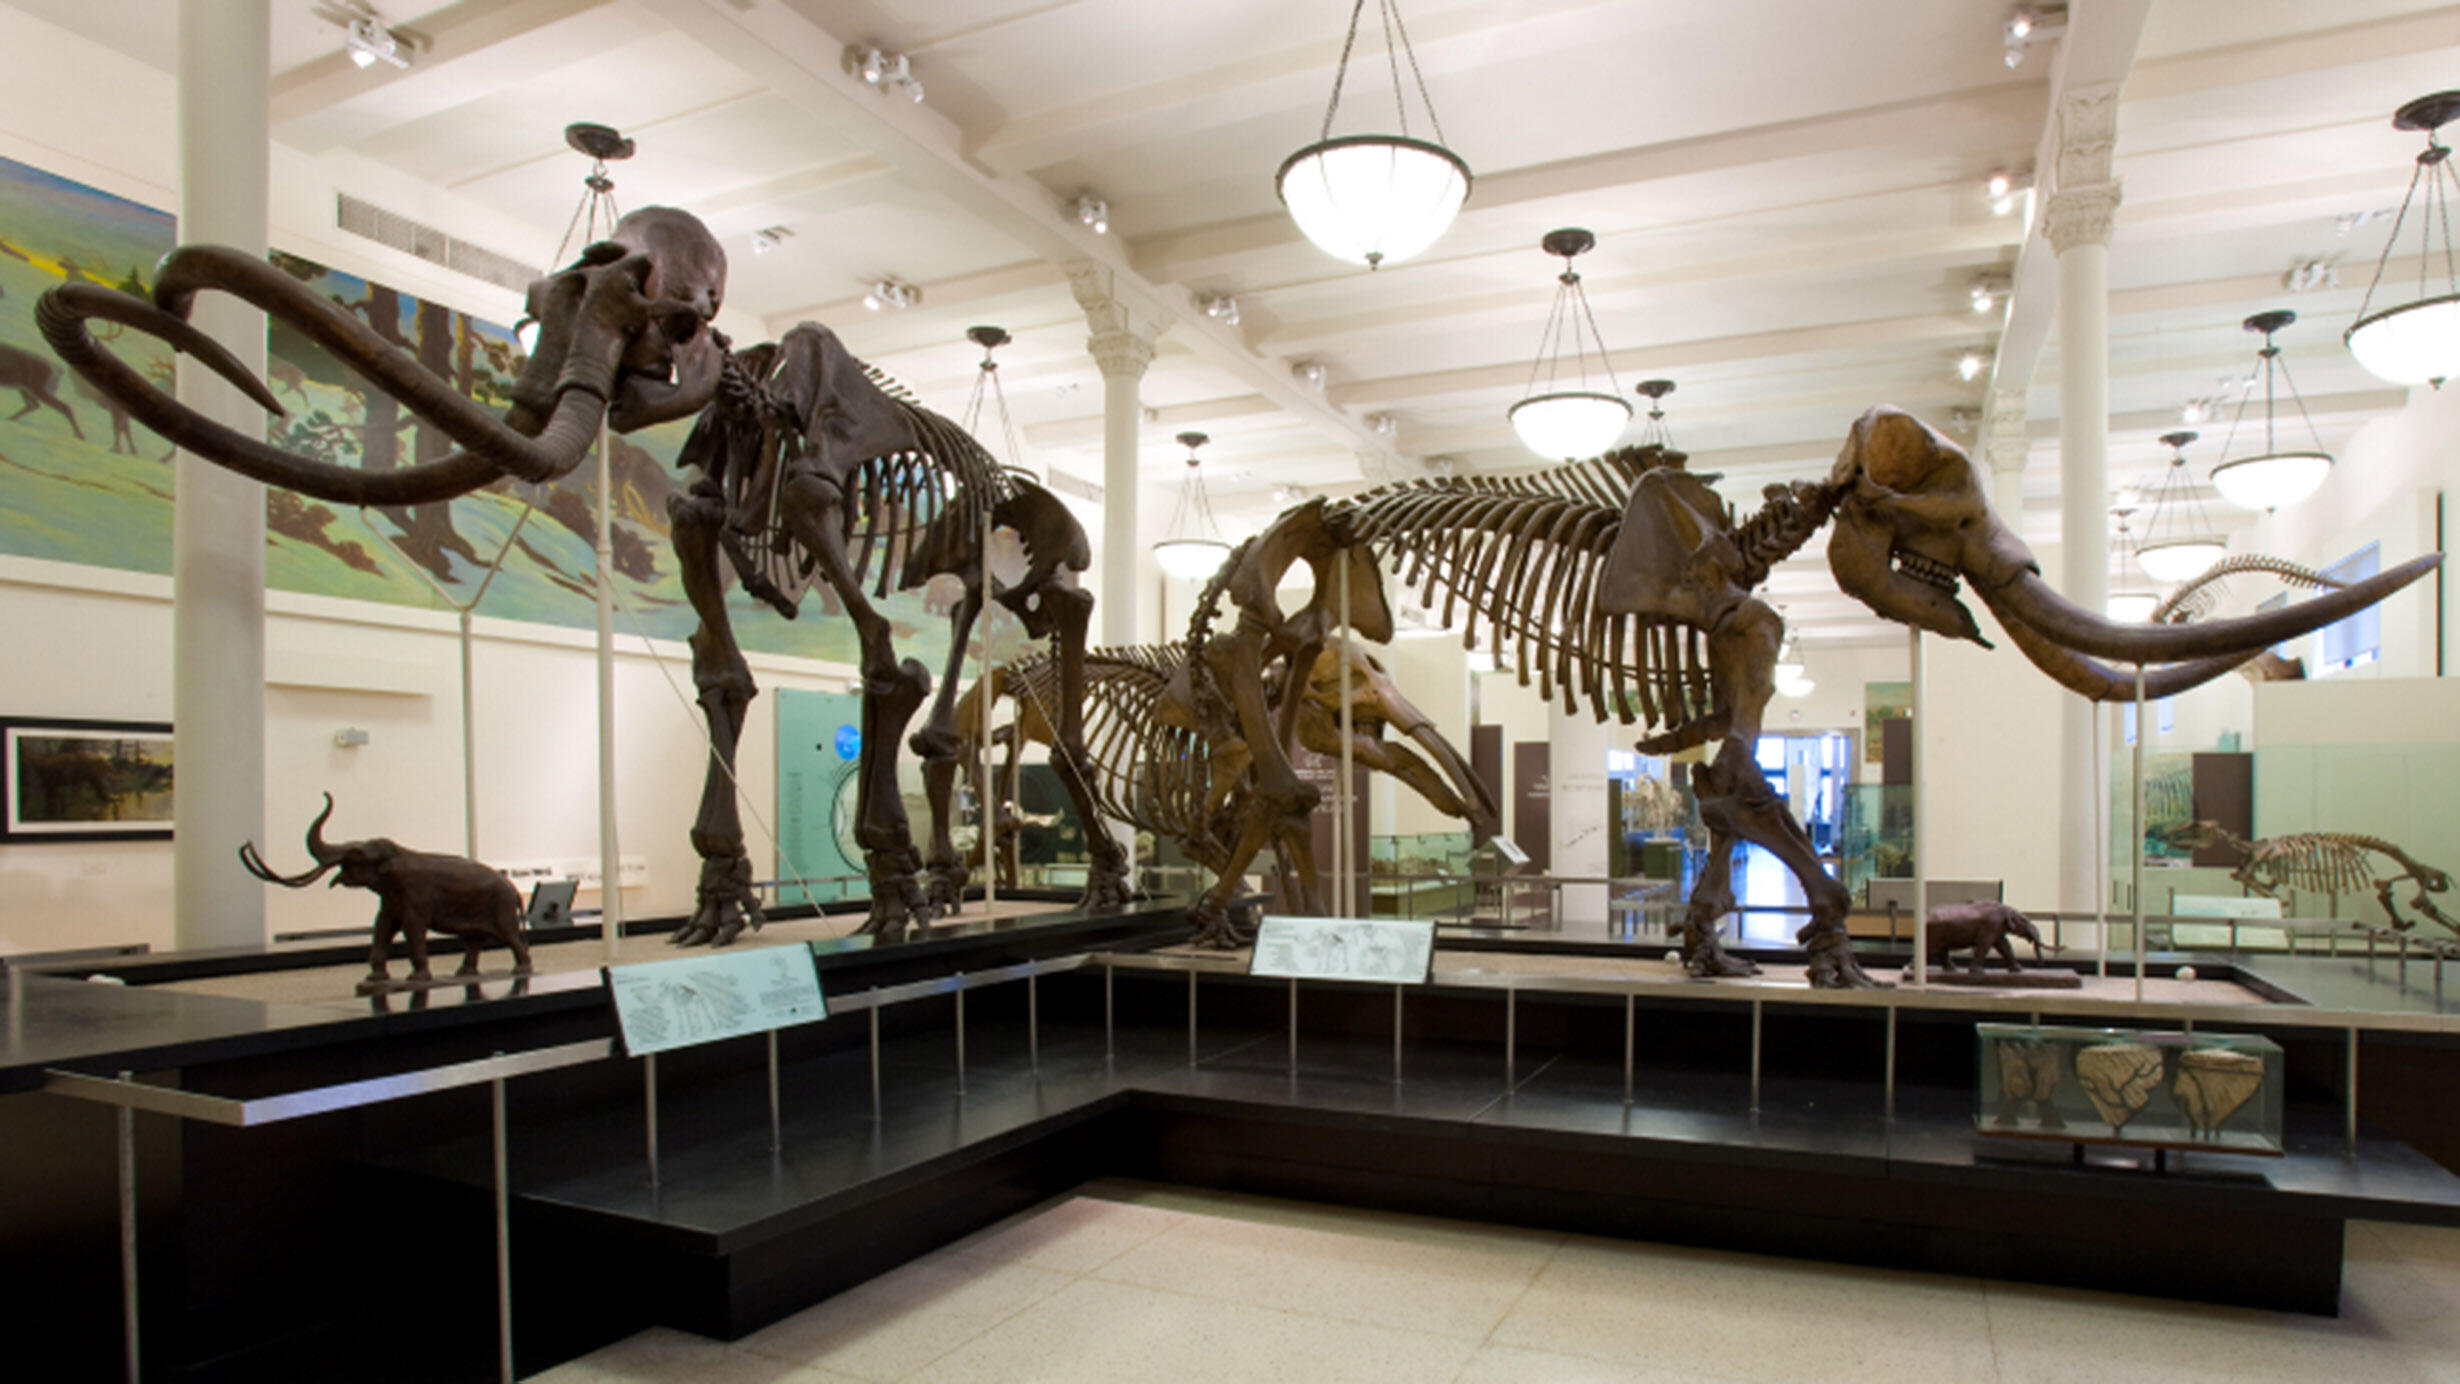 Mounted mammoth and mastodon fossil skeletons.